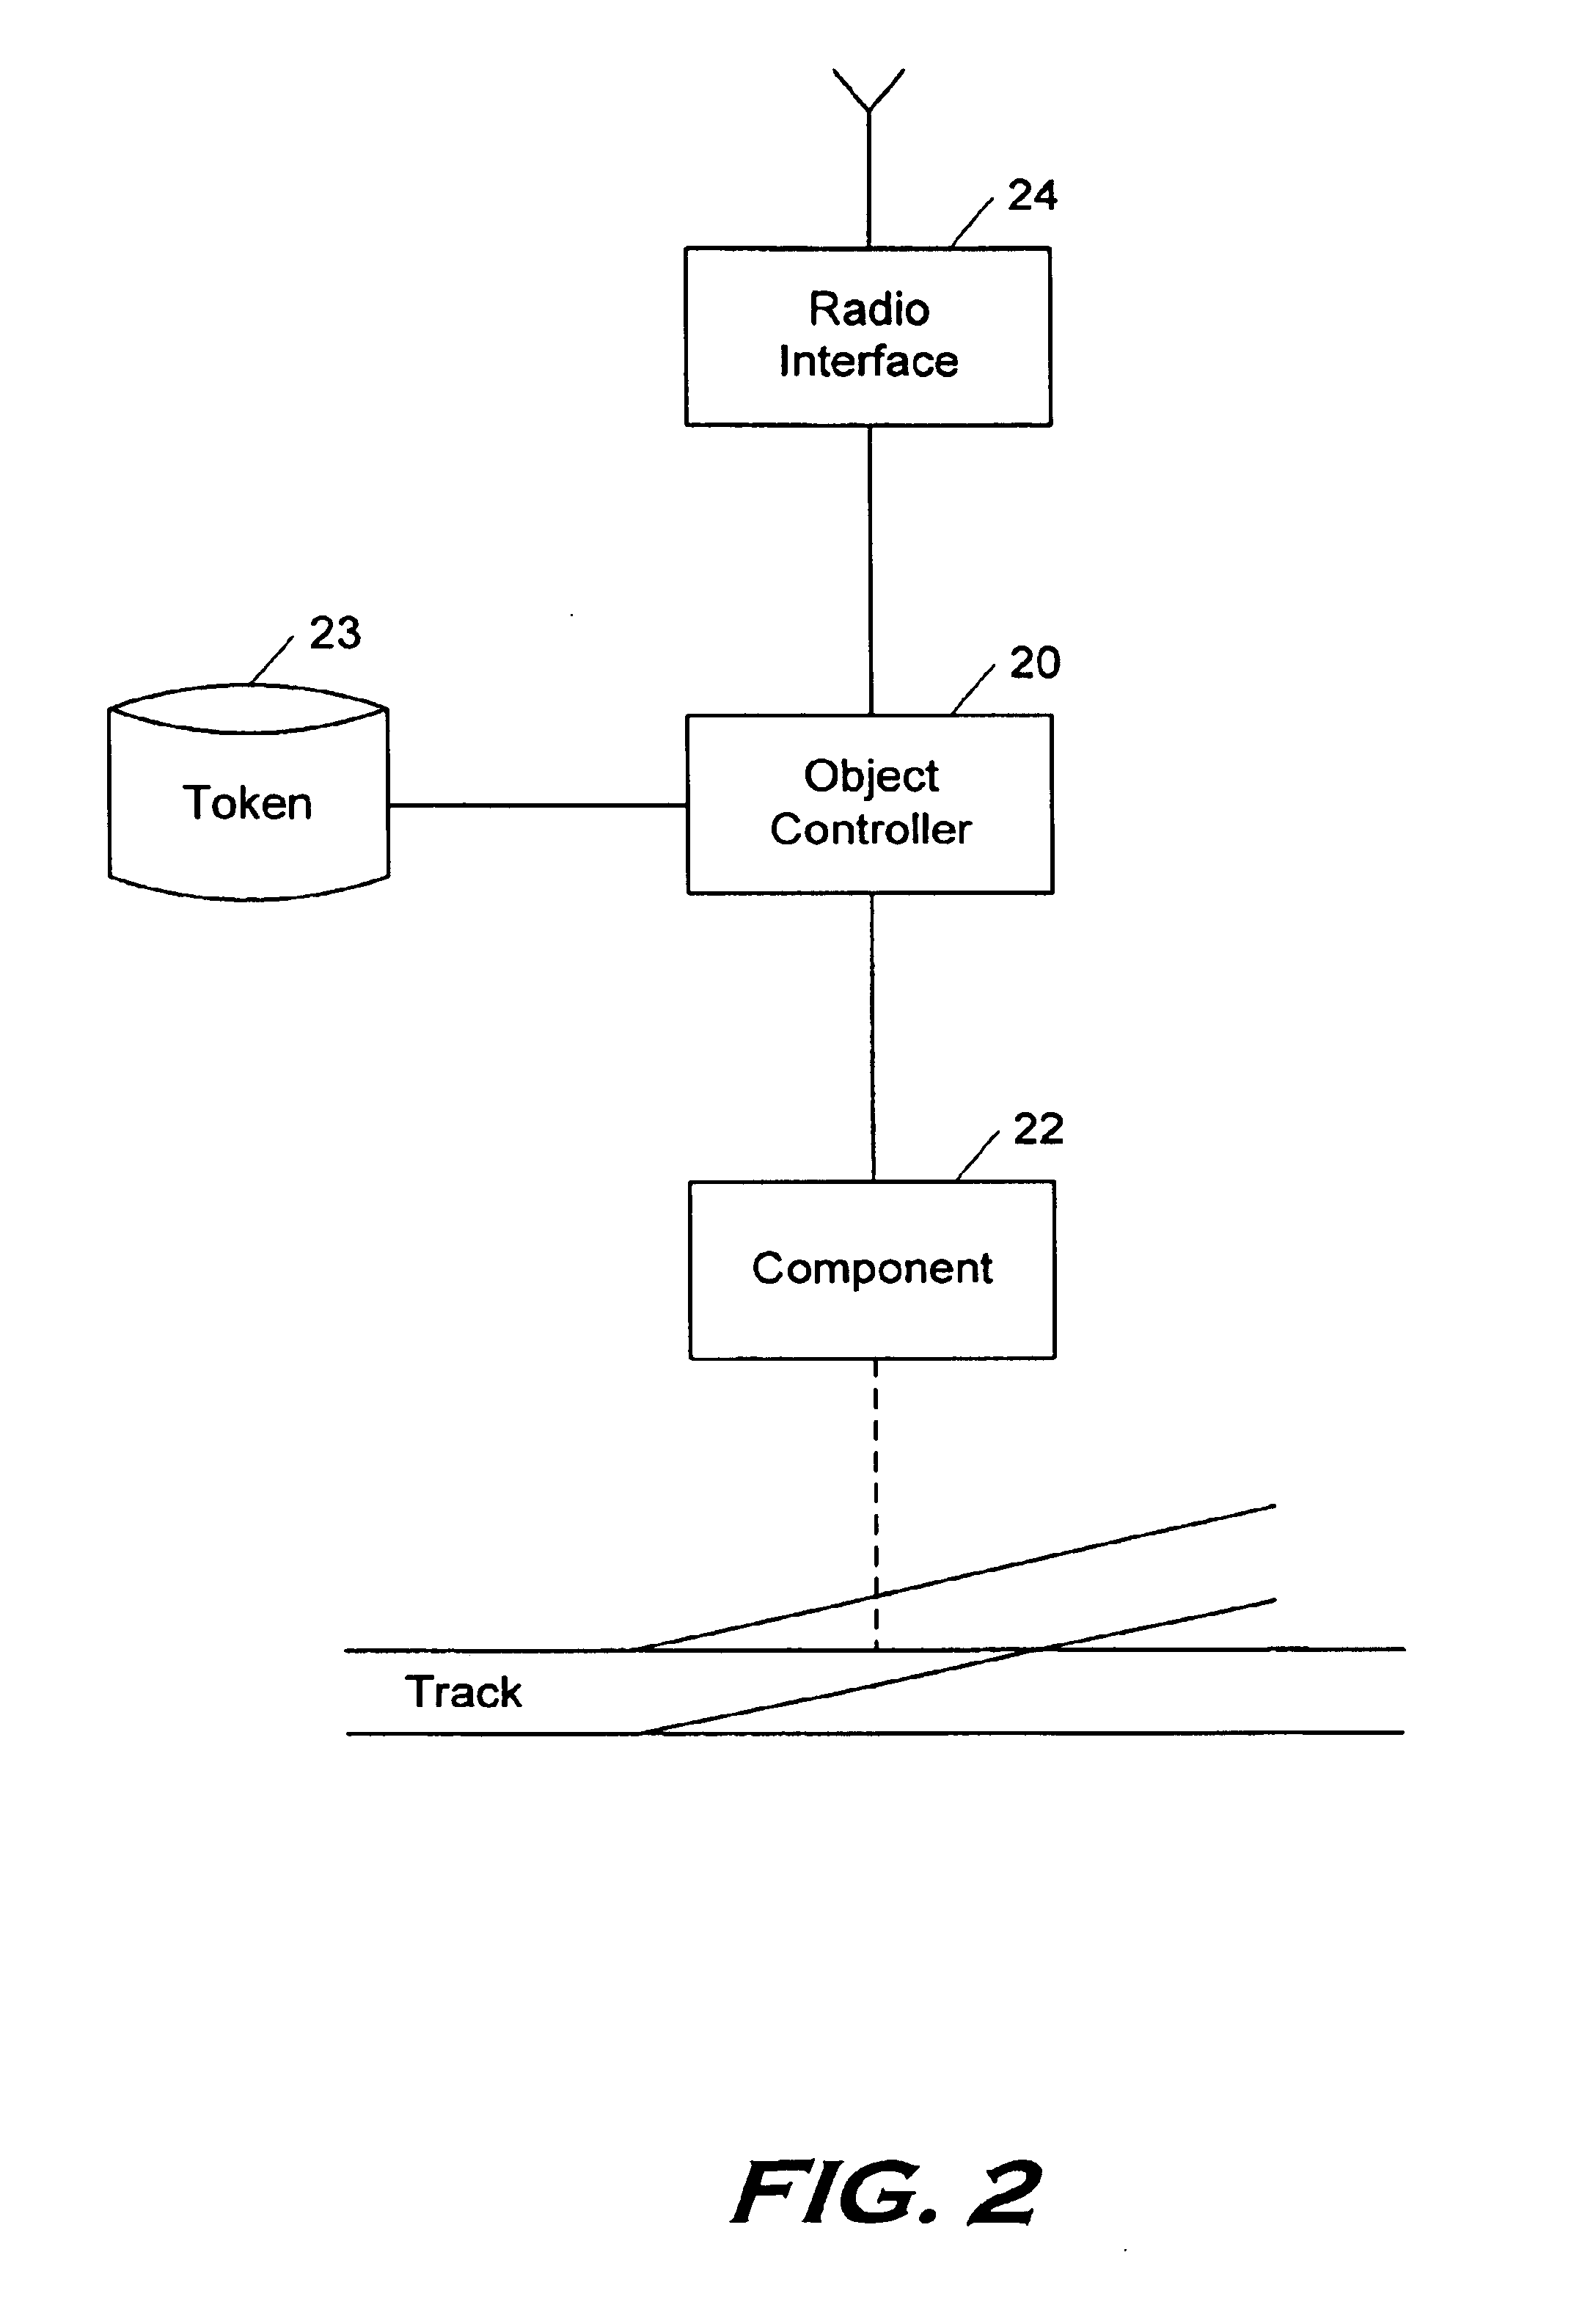 Method for secure determination of an object location, preferably a vehicle moving along a known course